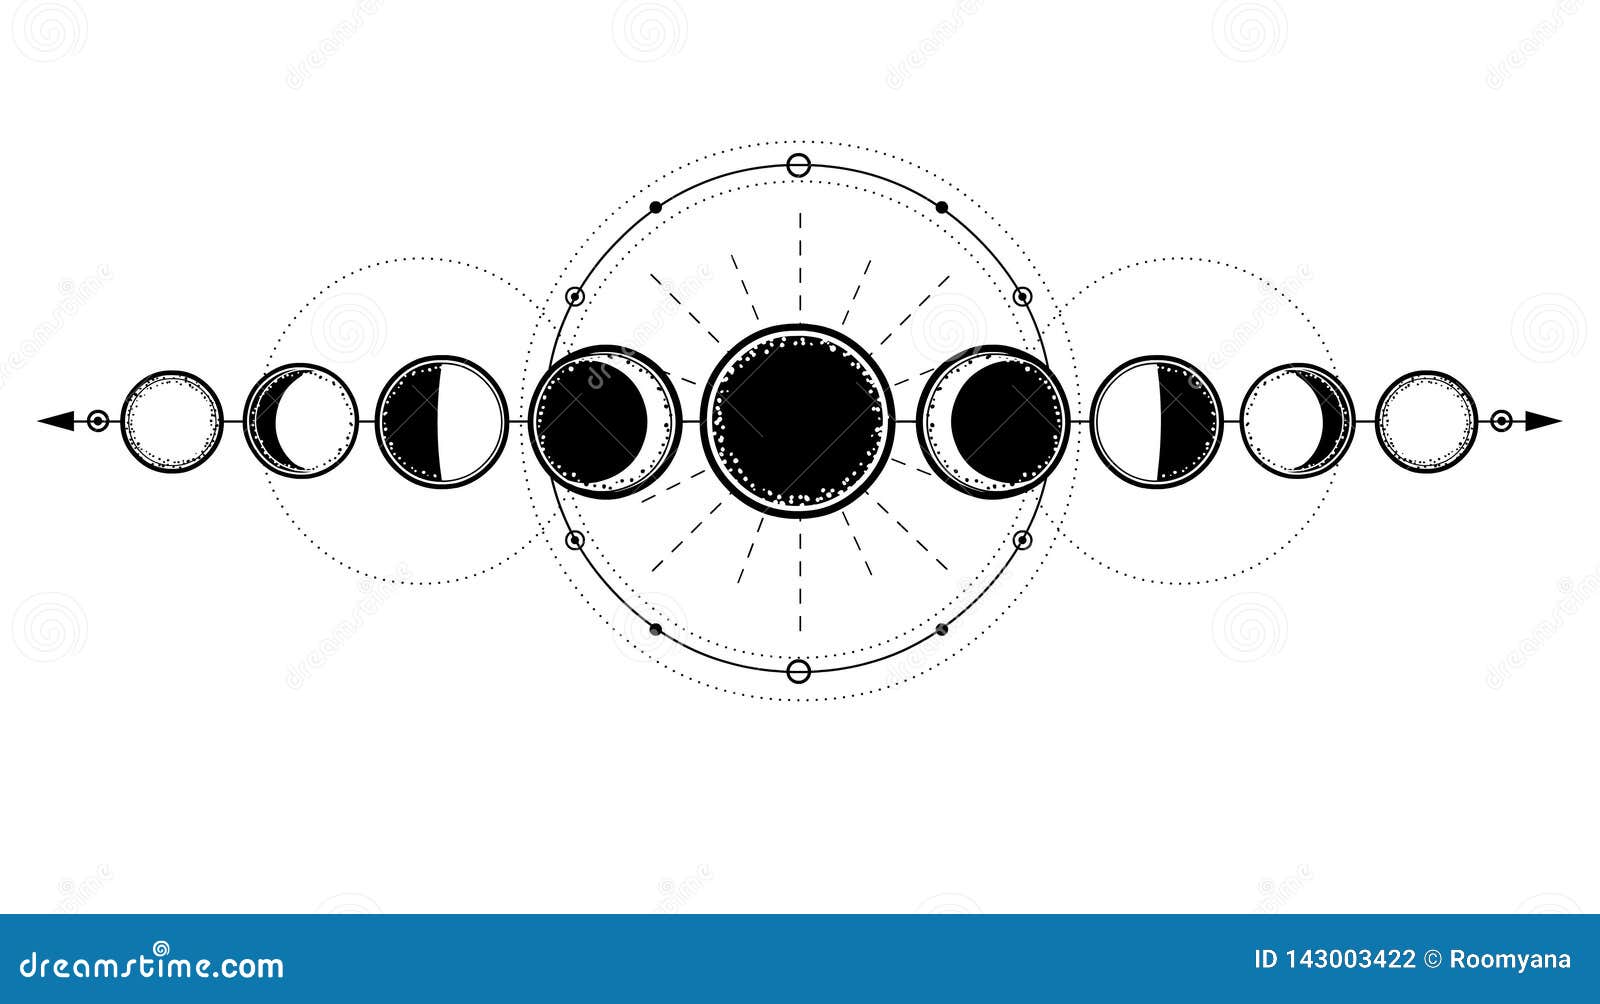 mystical drawing: phases of the moon, energy circles. sacred geometry.